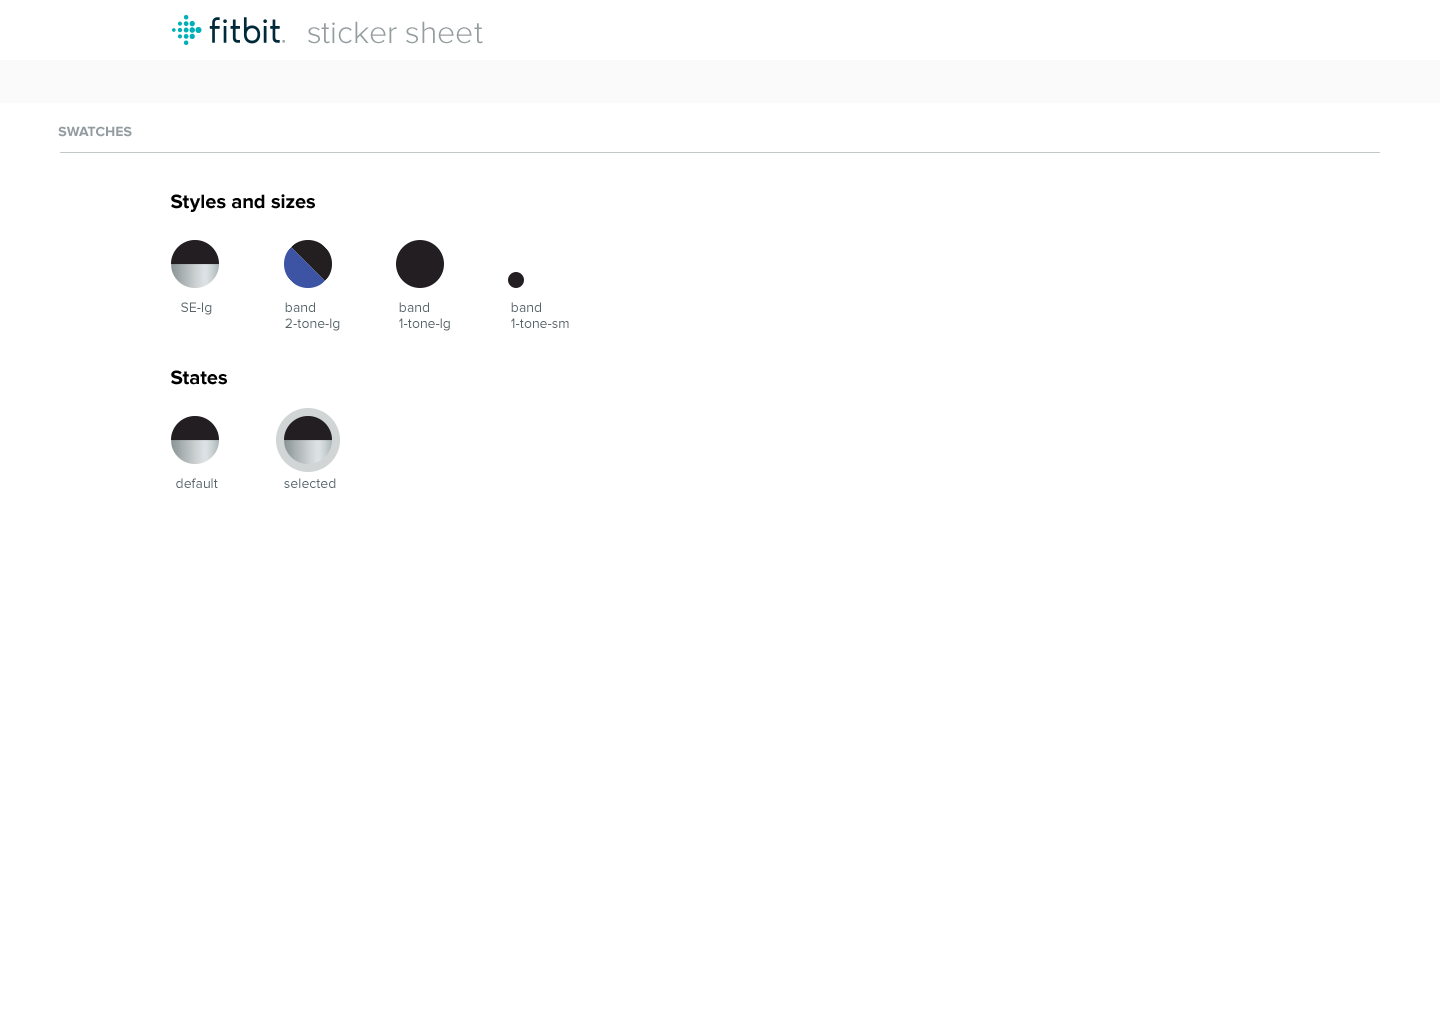 Fitbit_style-guide_0000_sticker_sheet_swatches.png